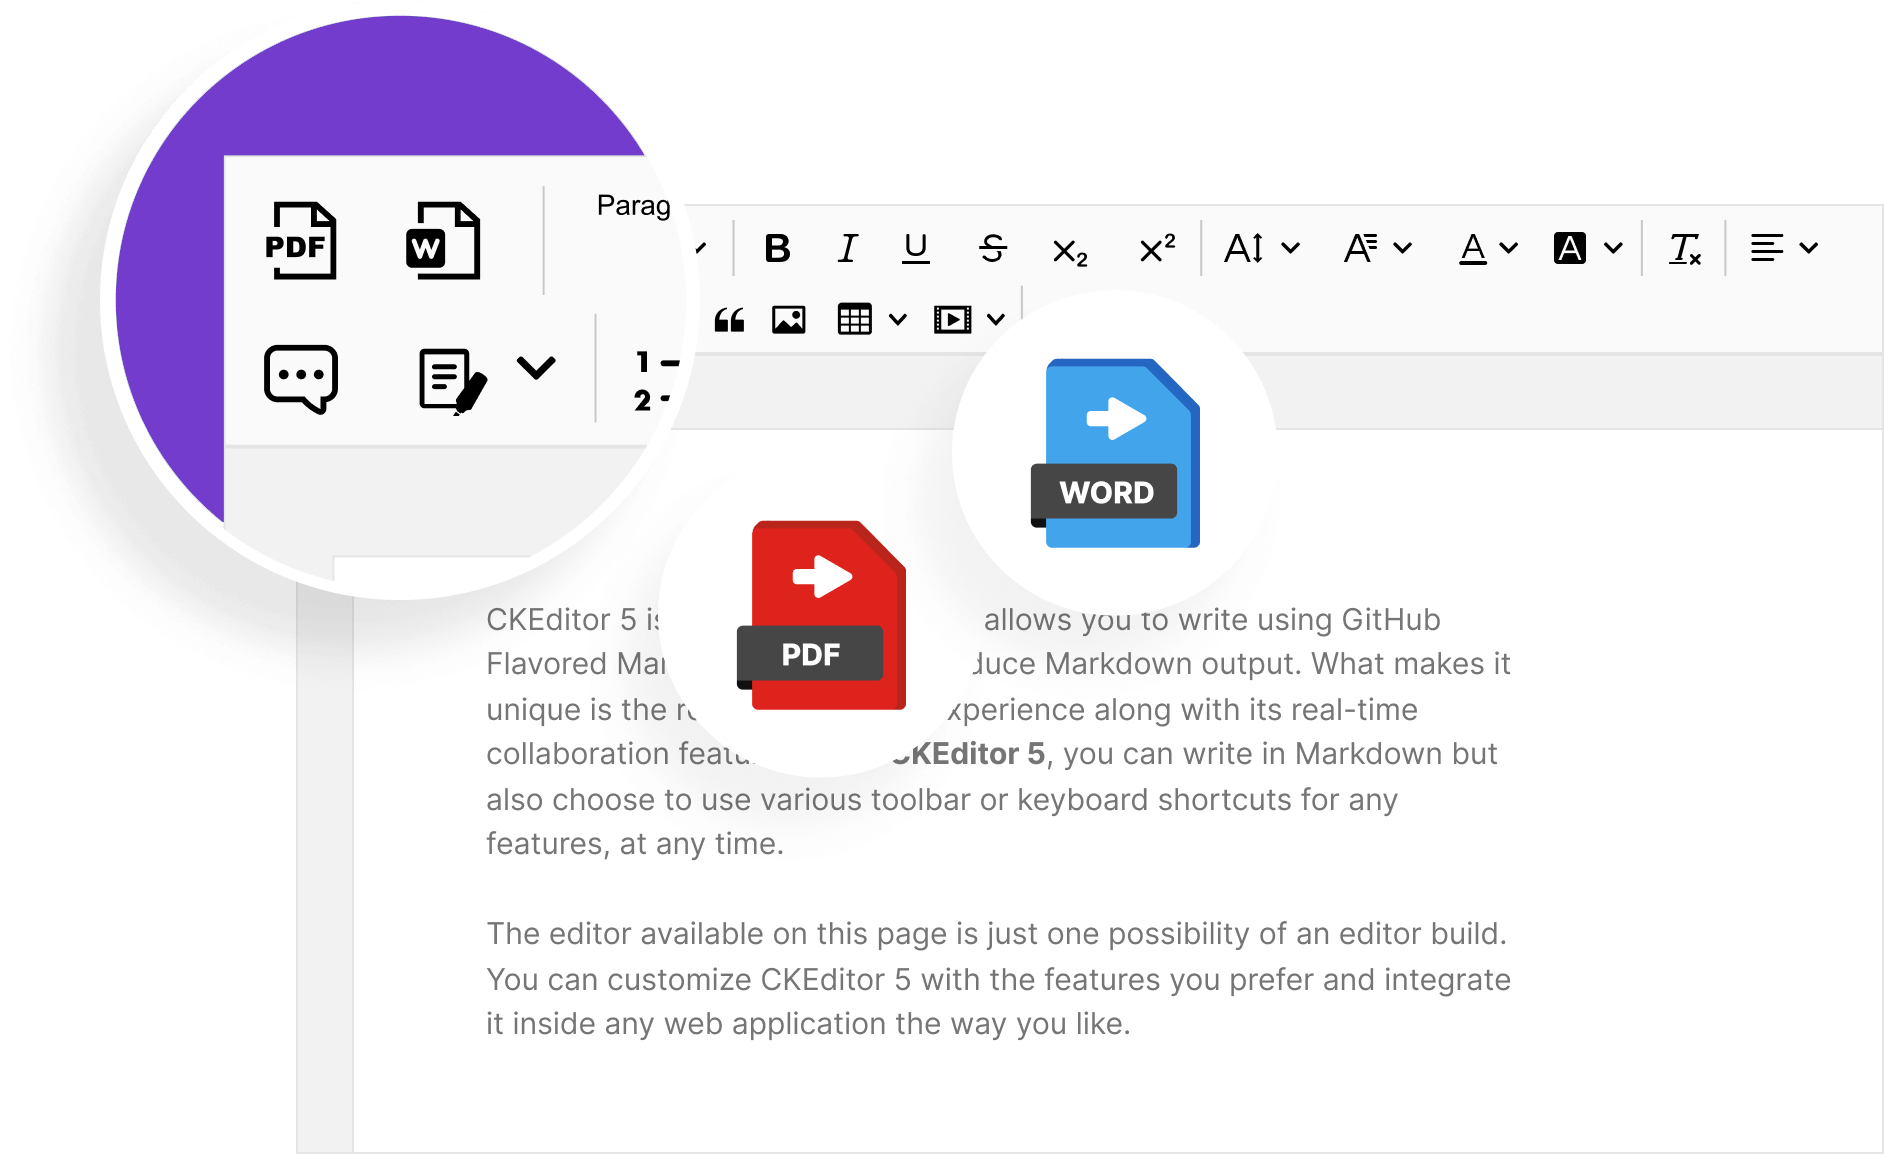 Editor with emphasized possibility to export content to pdf/word file